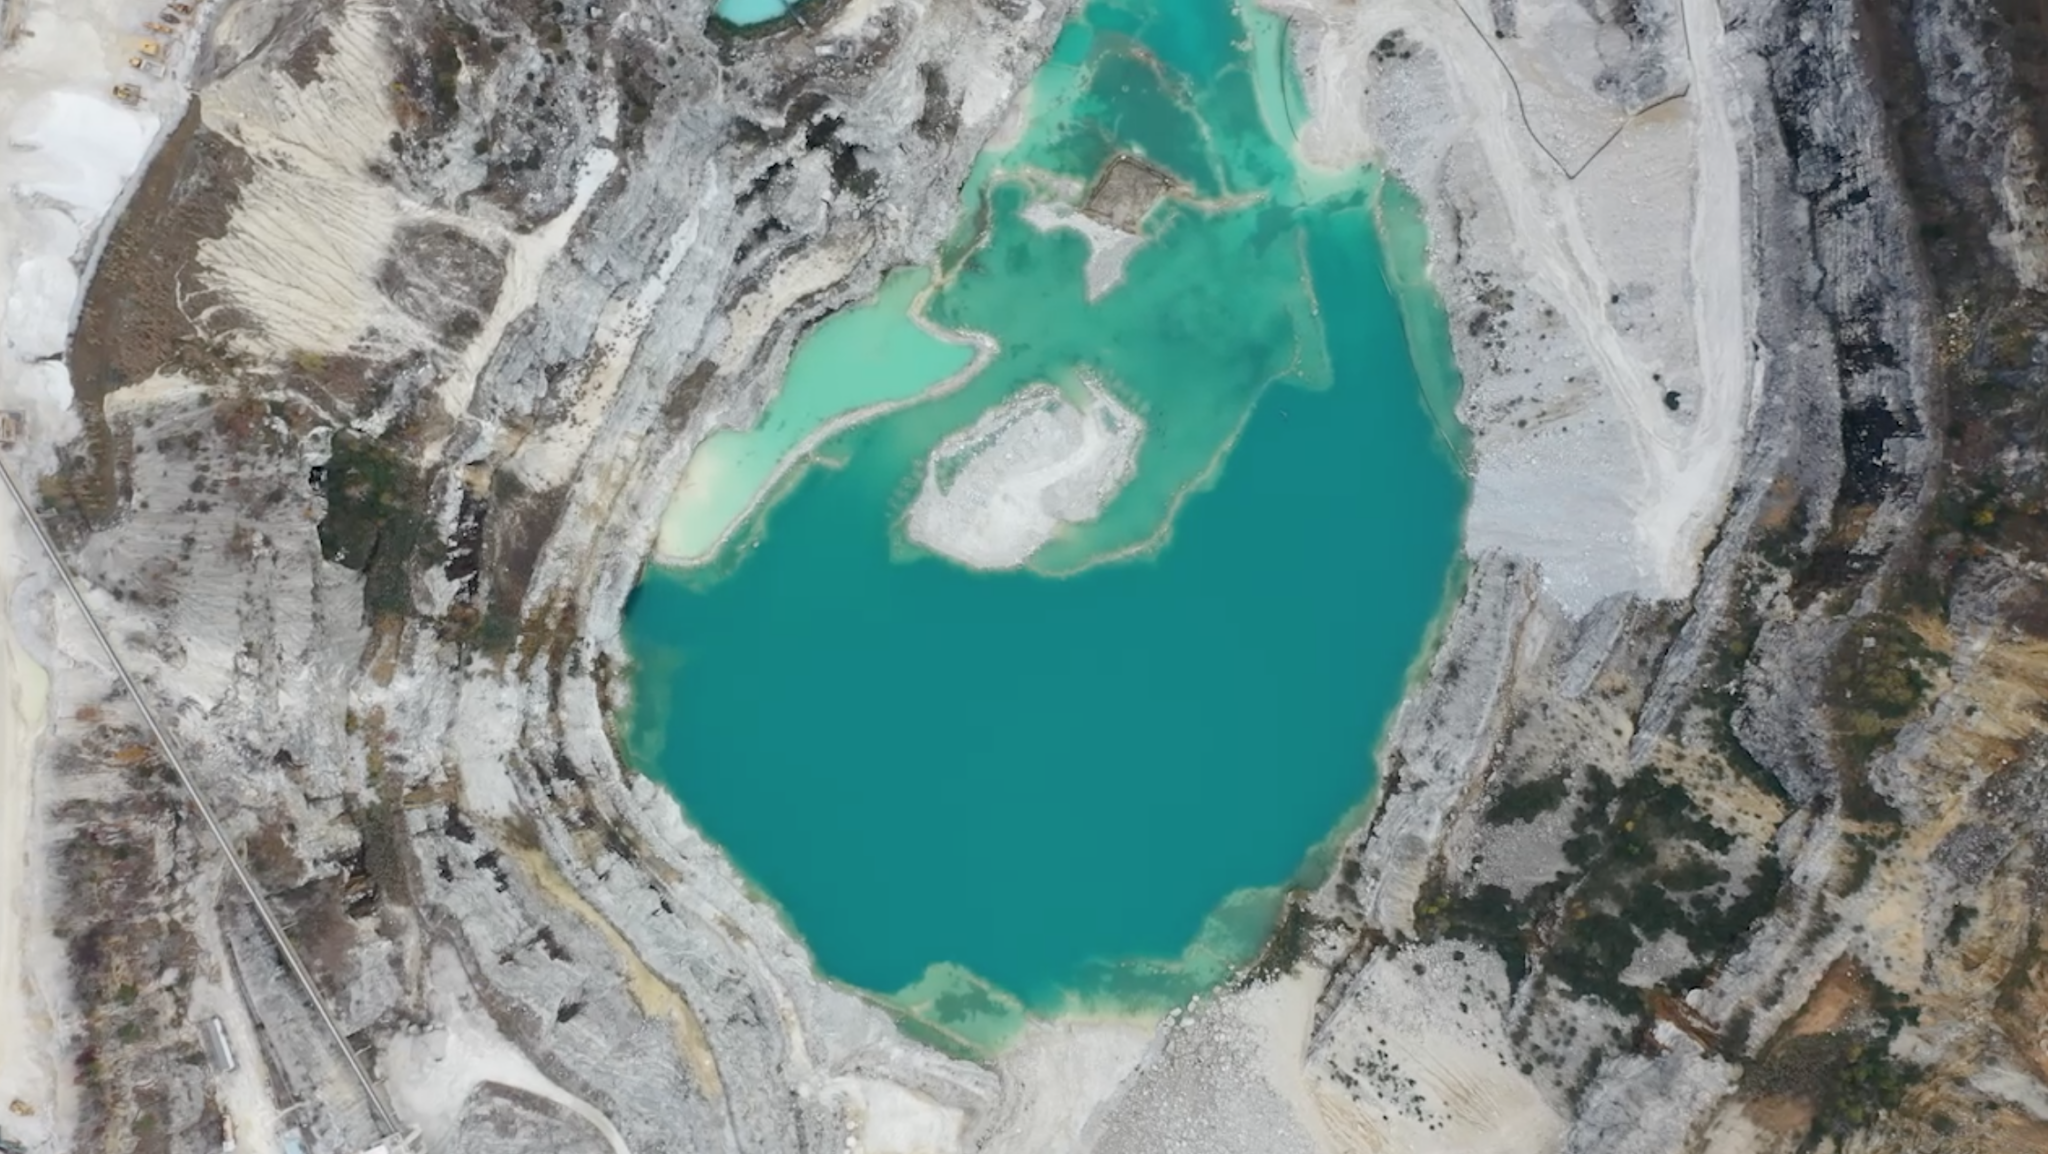 An overhead image of a marble quarry.